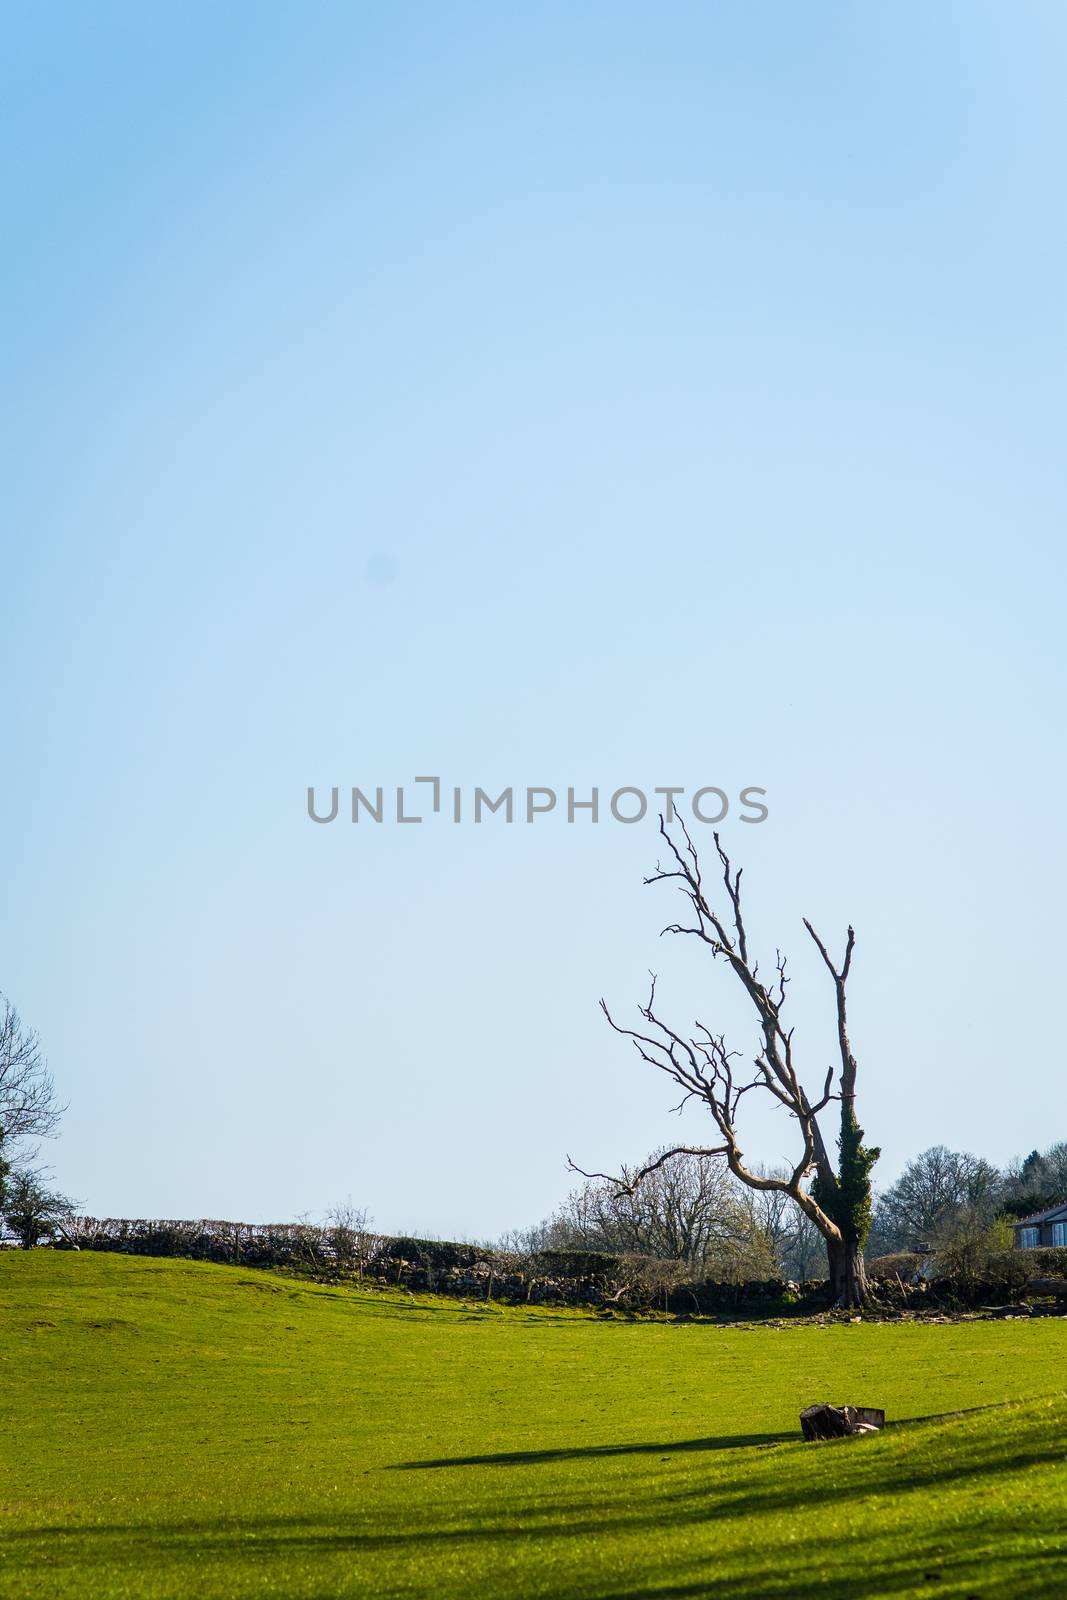 Old lonely dry tree without leaves in a field